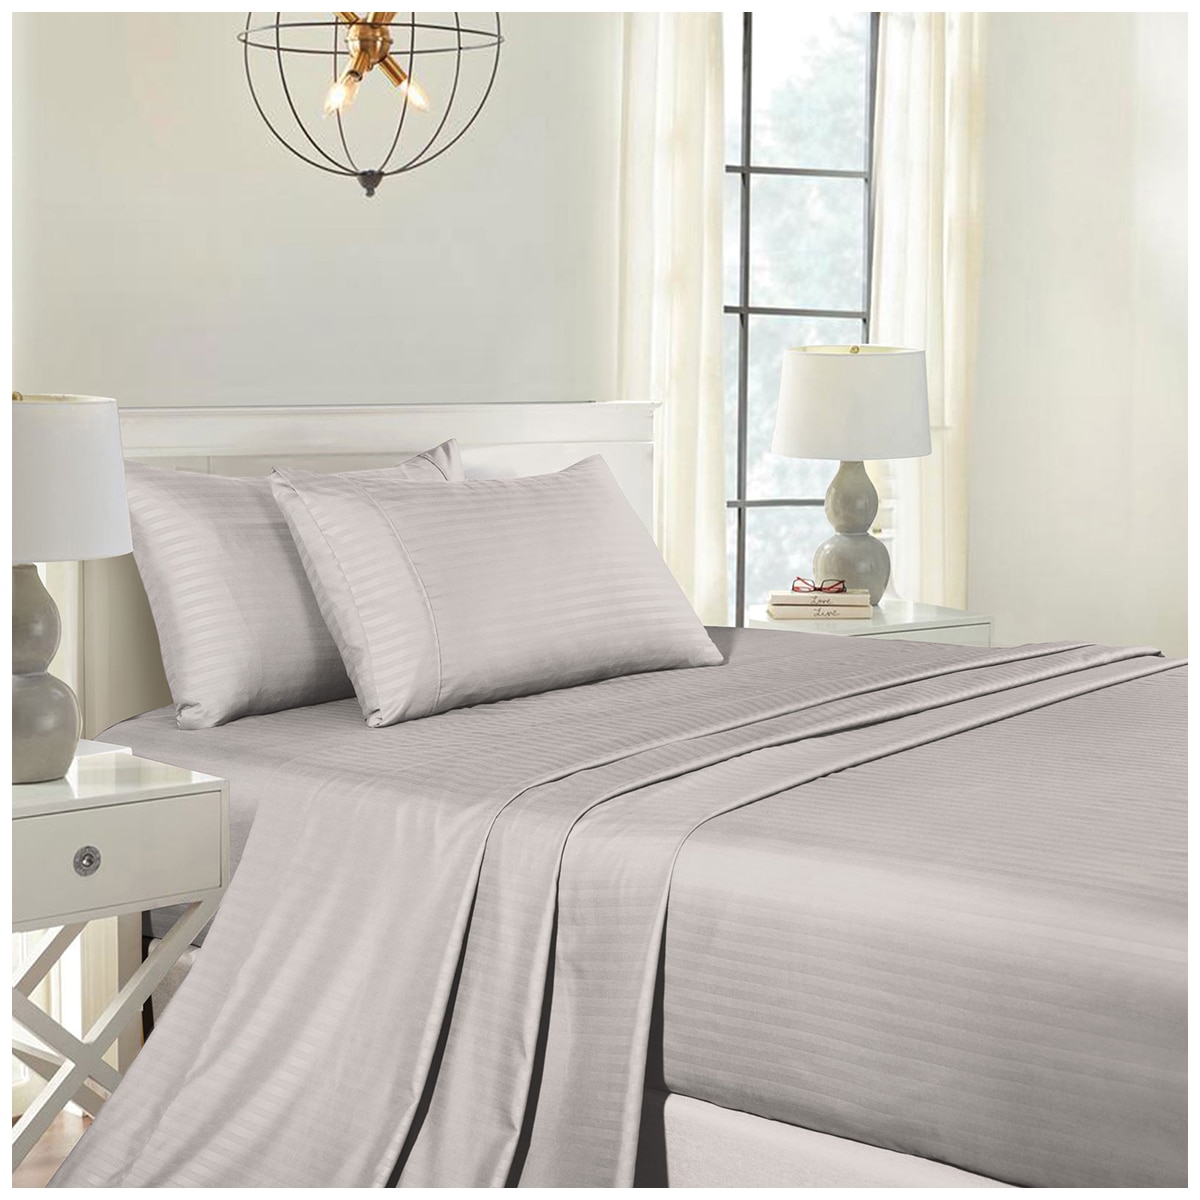 Bdirect Royal Comfort Blended Bamboo Sheet Set with stripes Double - Silver Grey